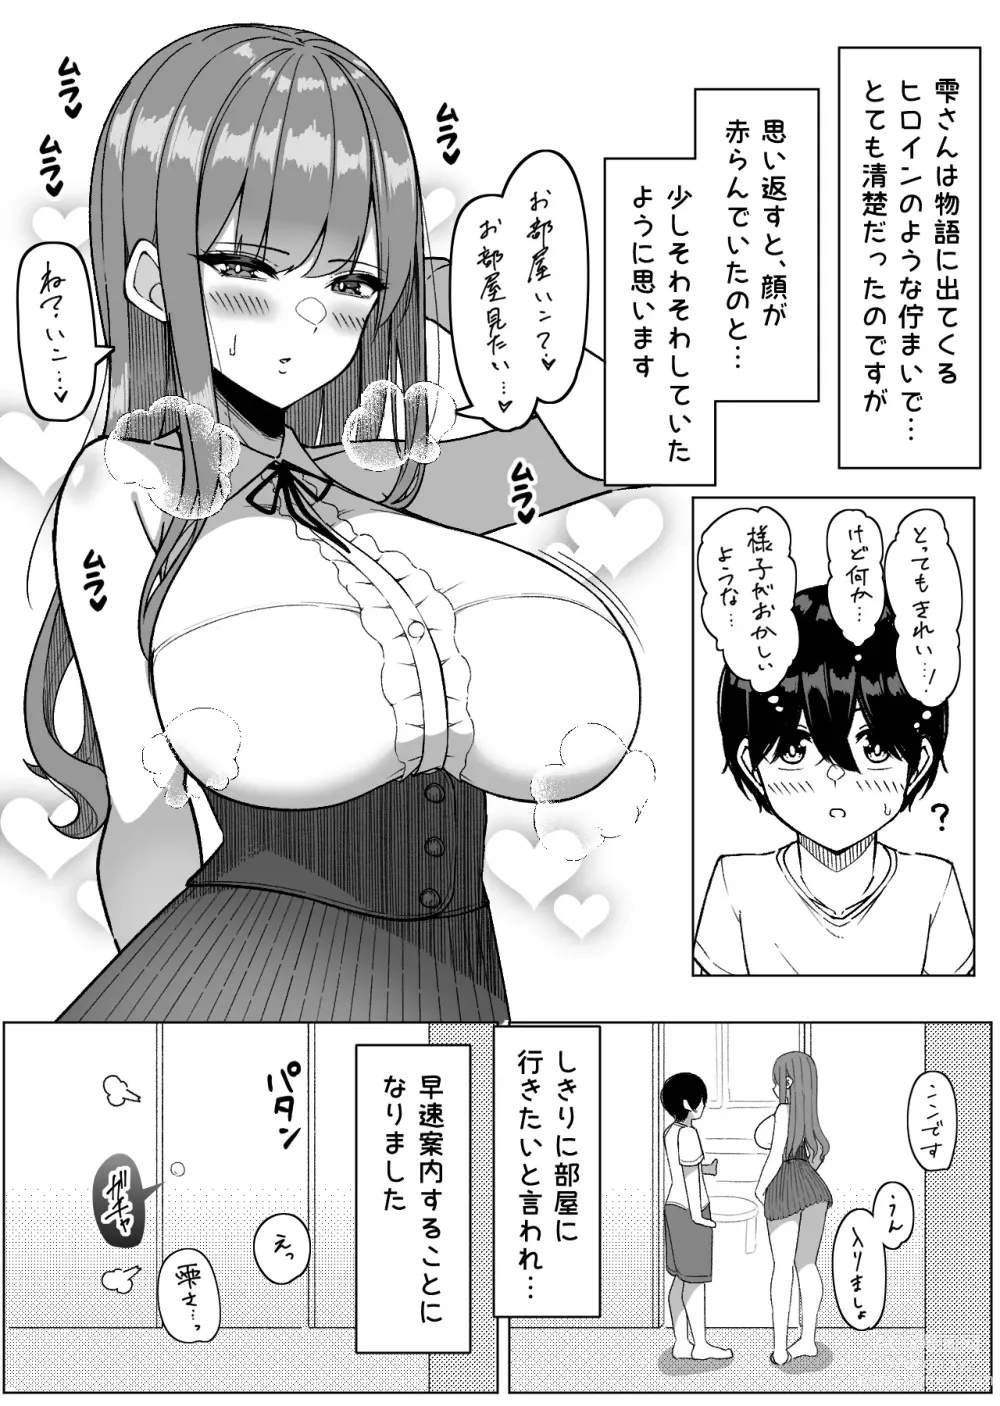 Page 28 of doujinshi Daily Sleepover With Big-breasted Girls